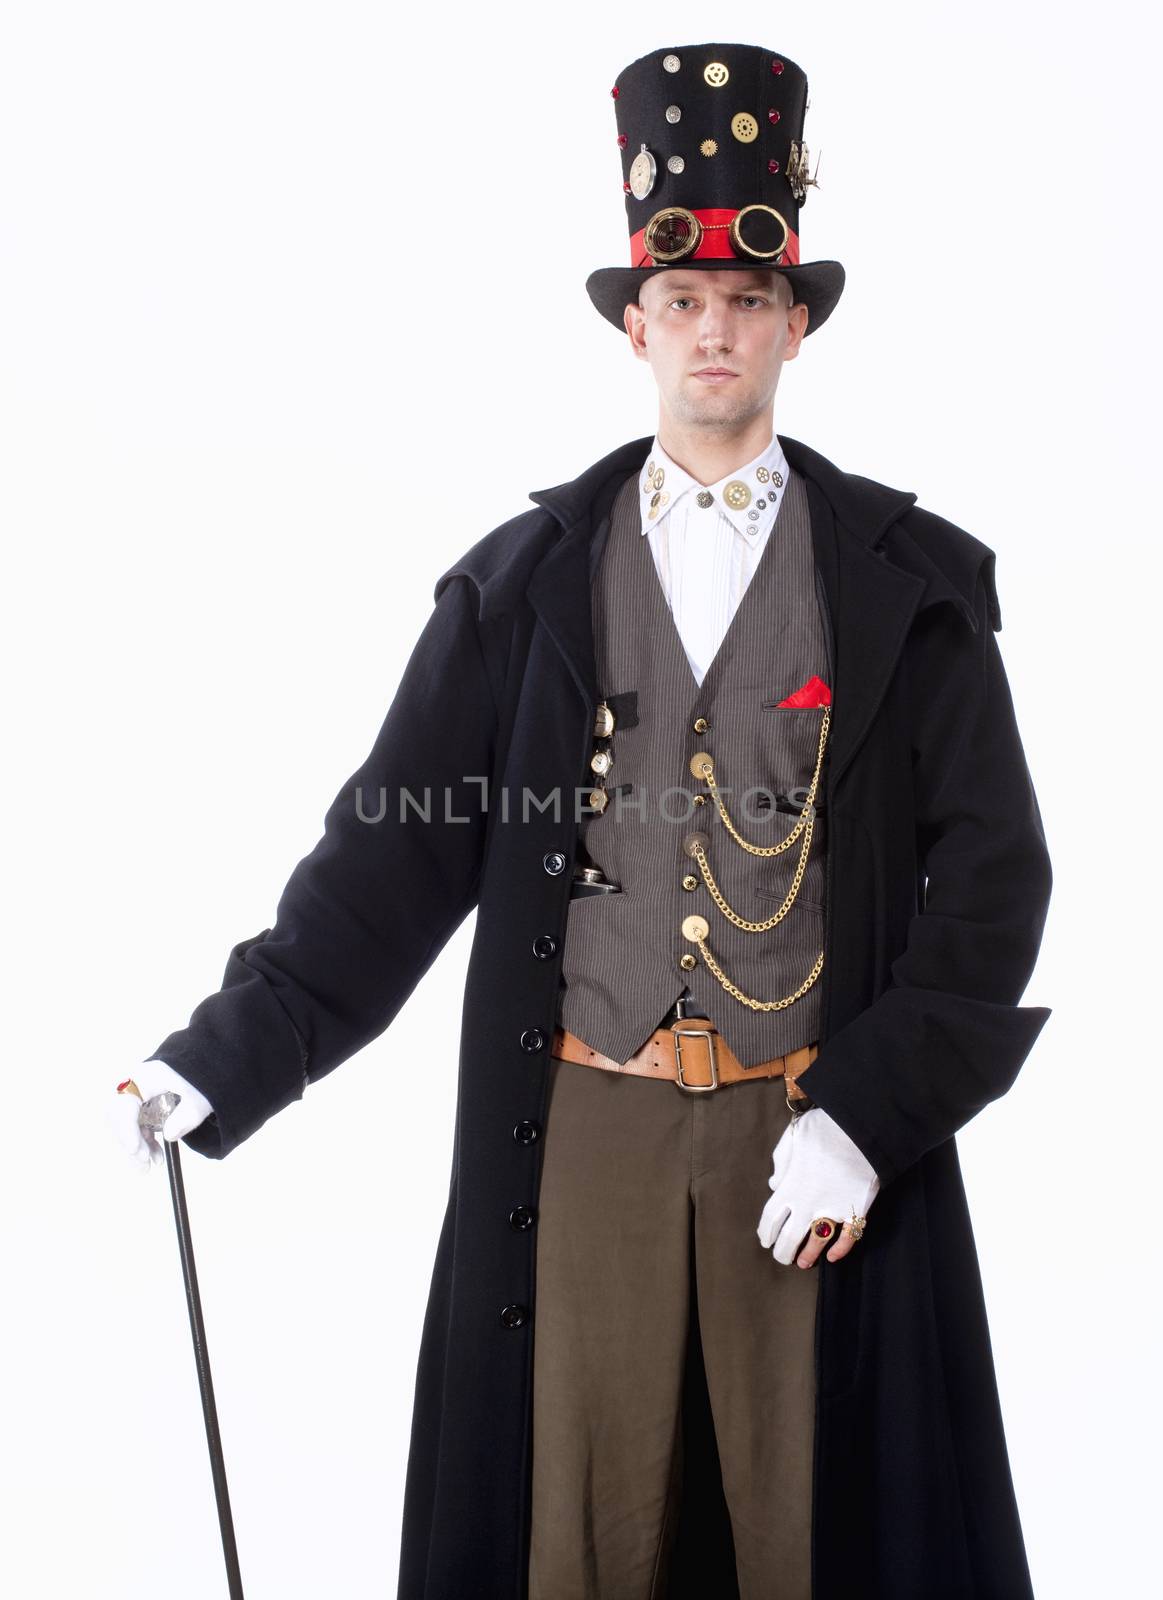 Magician with High Hat, Long Coat and Clock Parts Details by courtyardpix